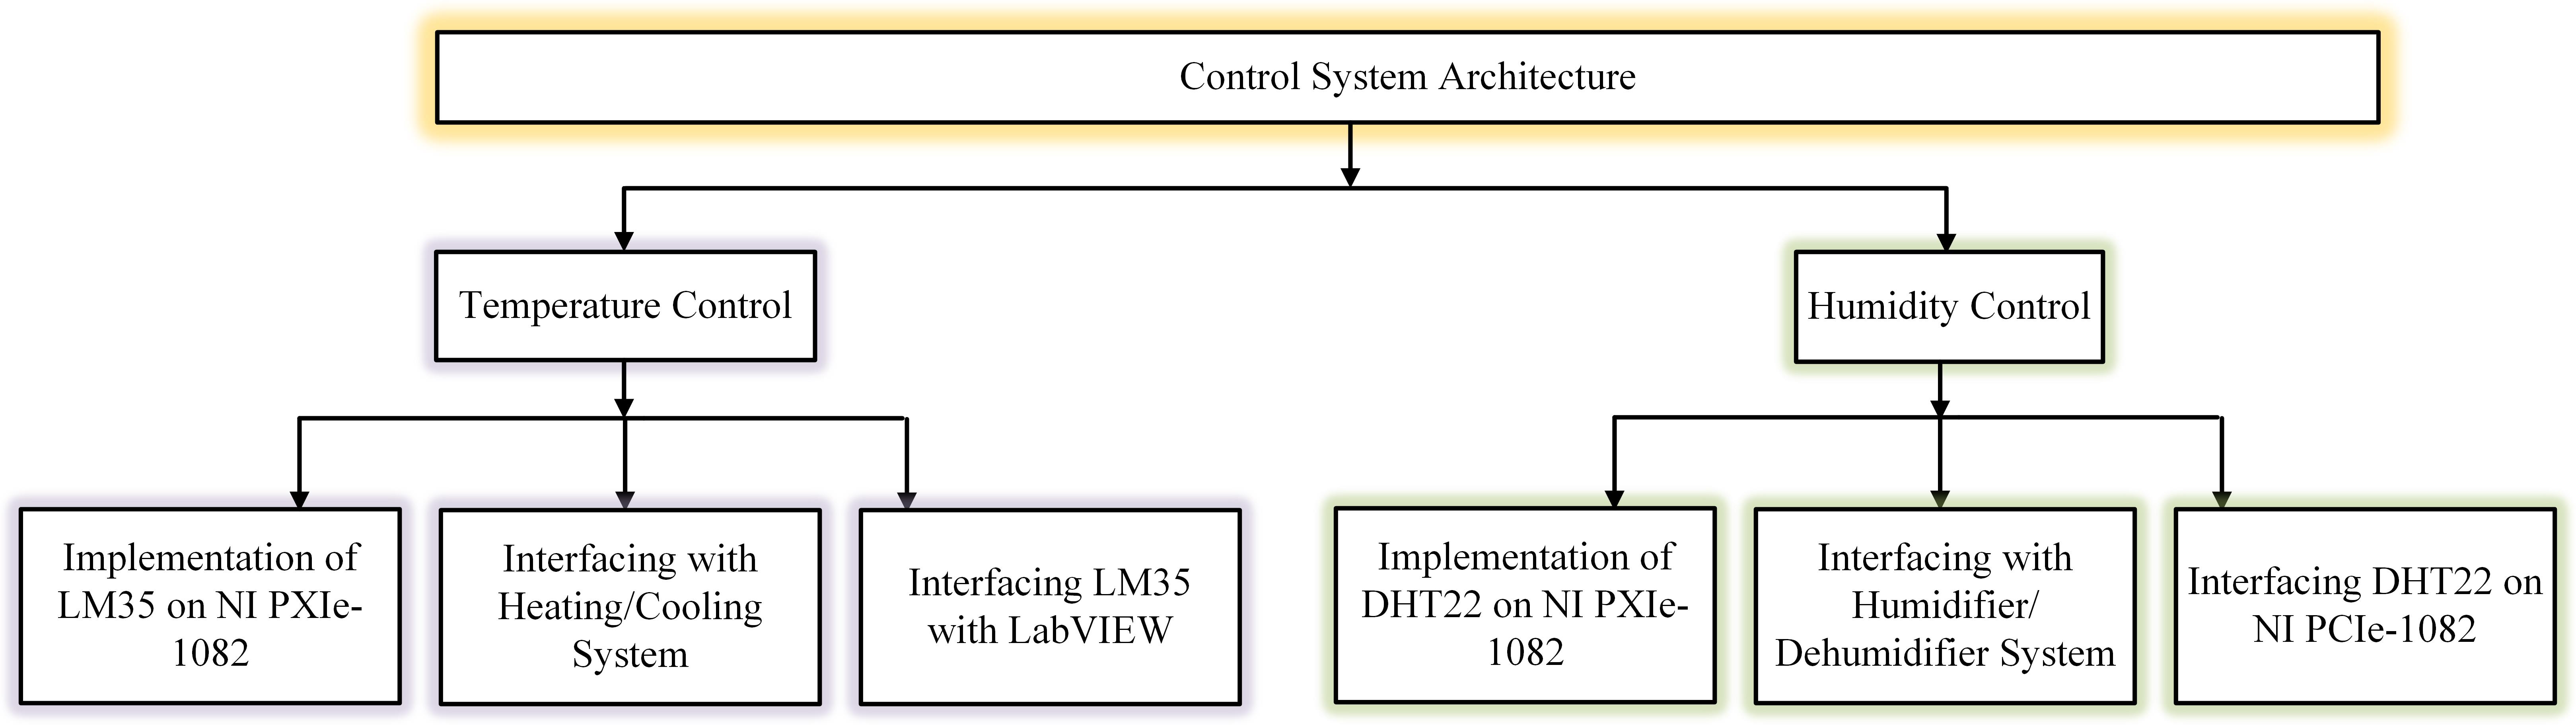 Functionalities of Control System Architecture